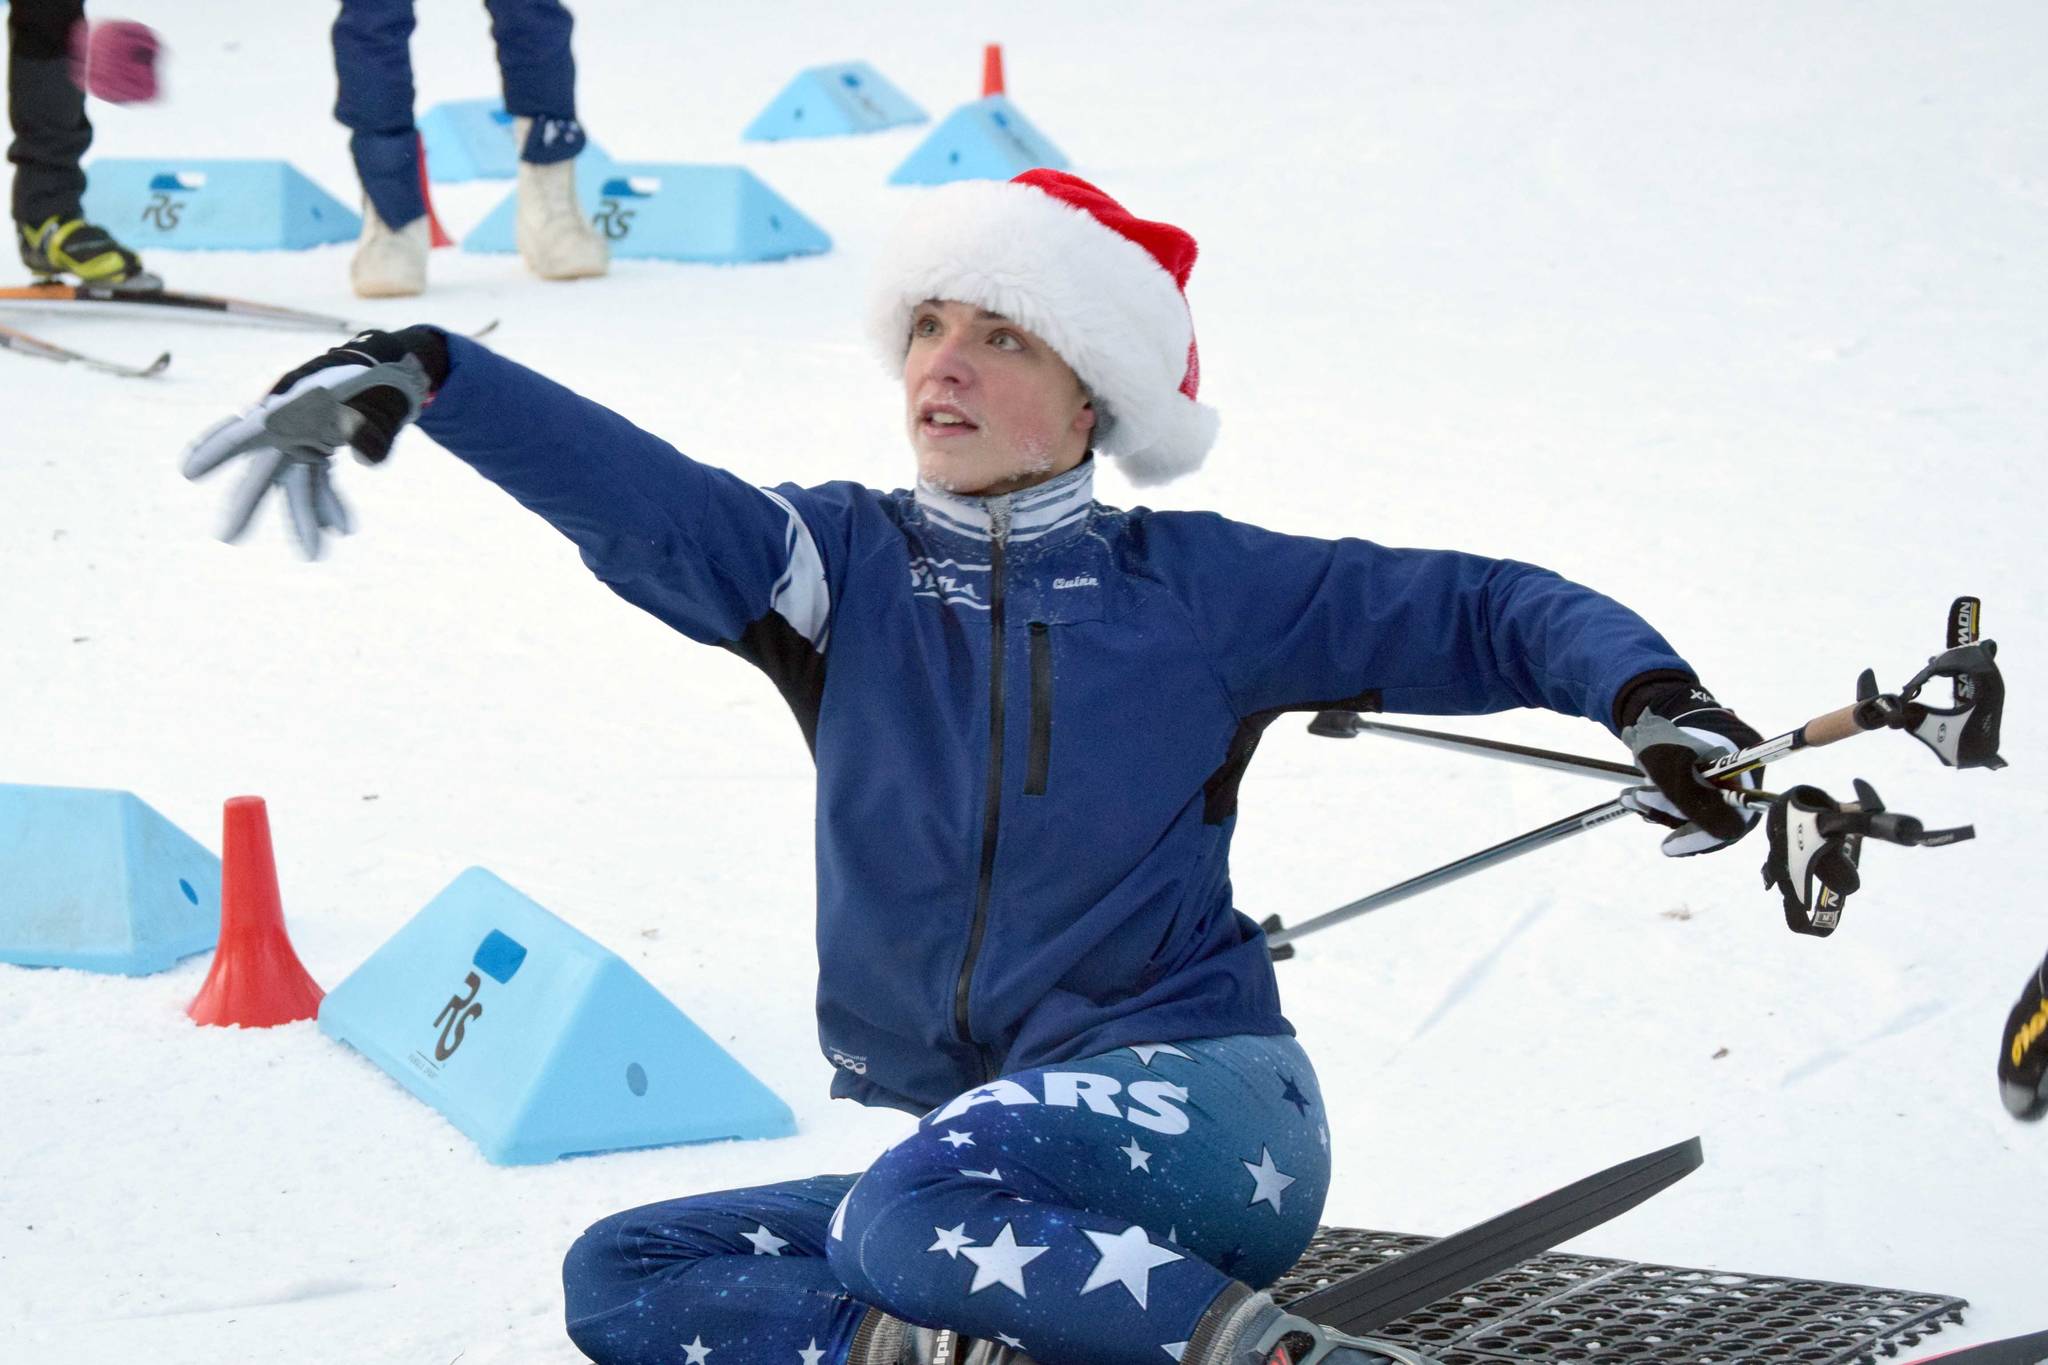 Candy Cane Scramble is Christmas on skis